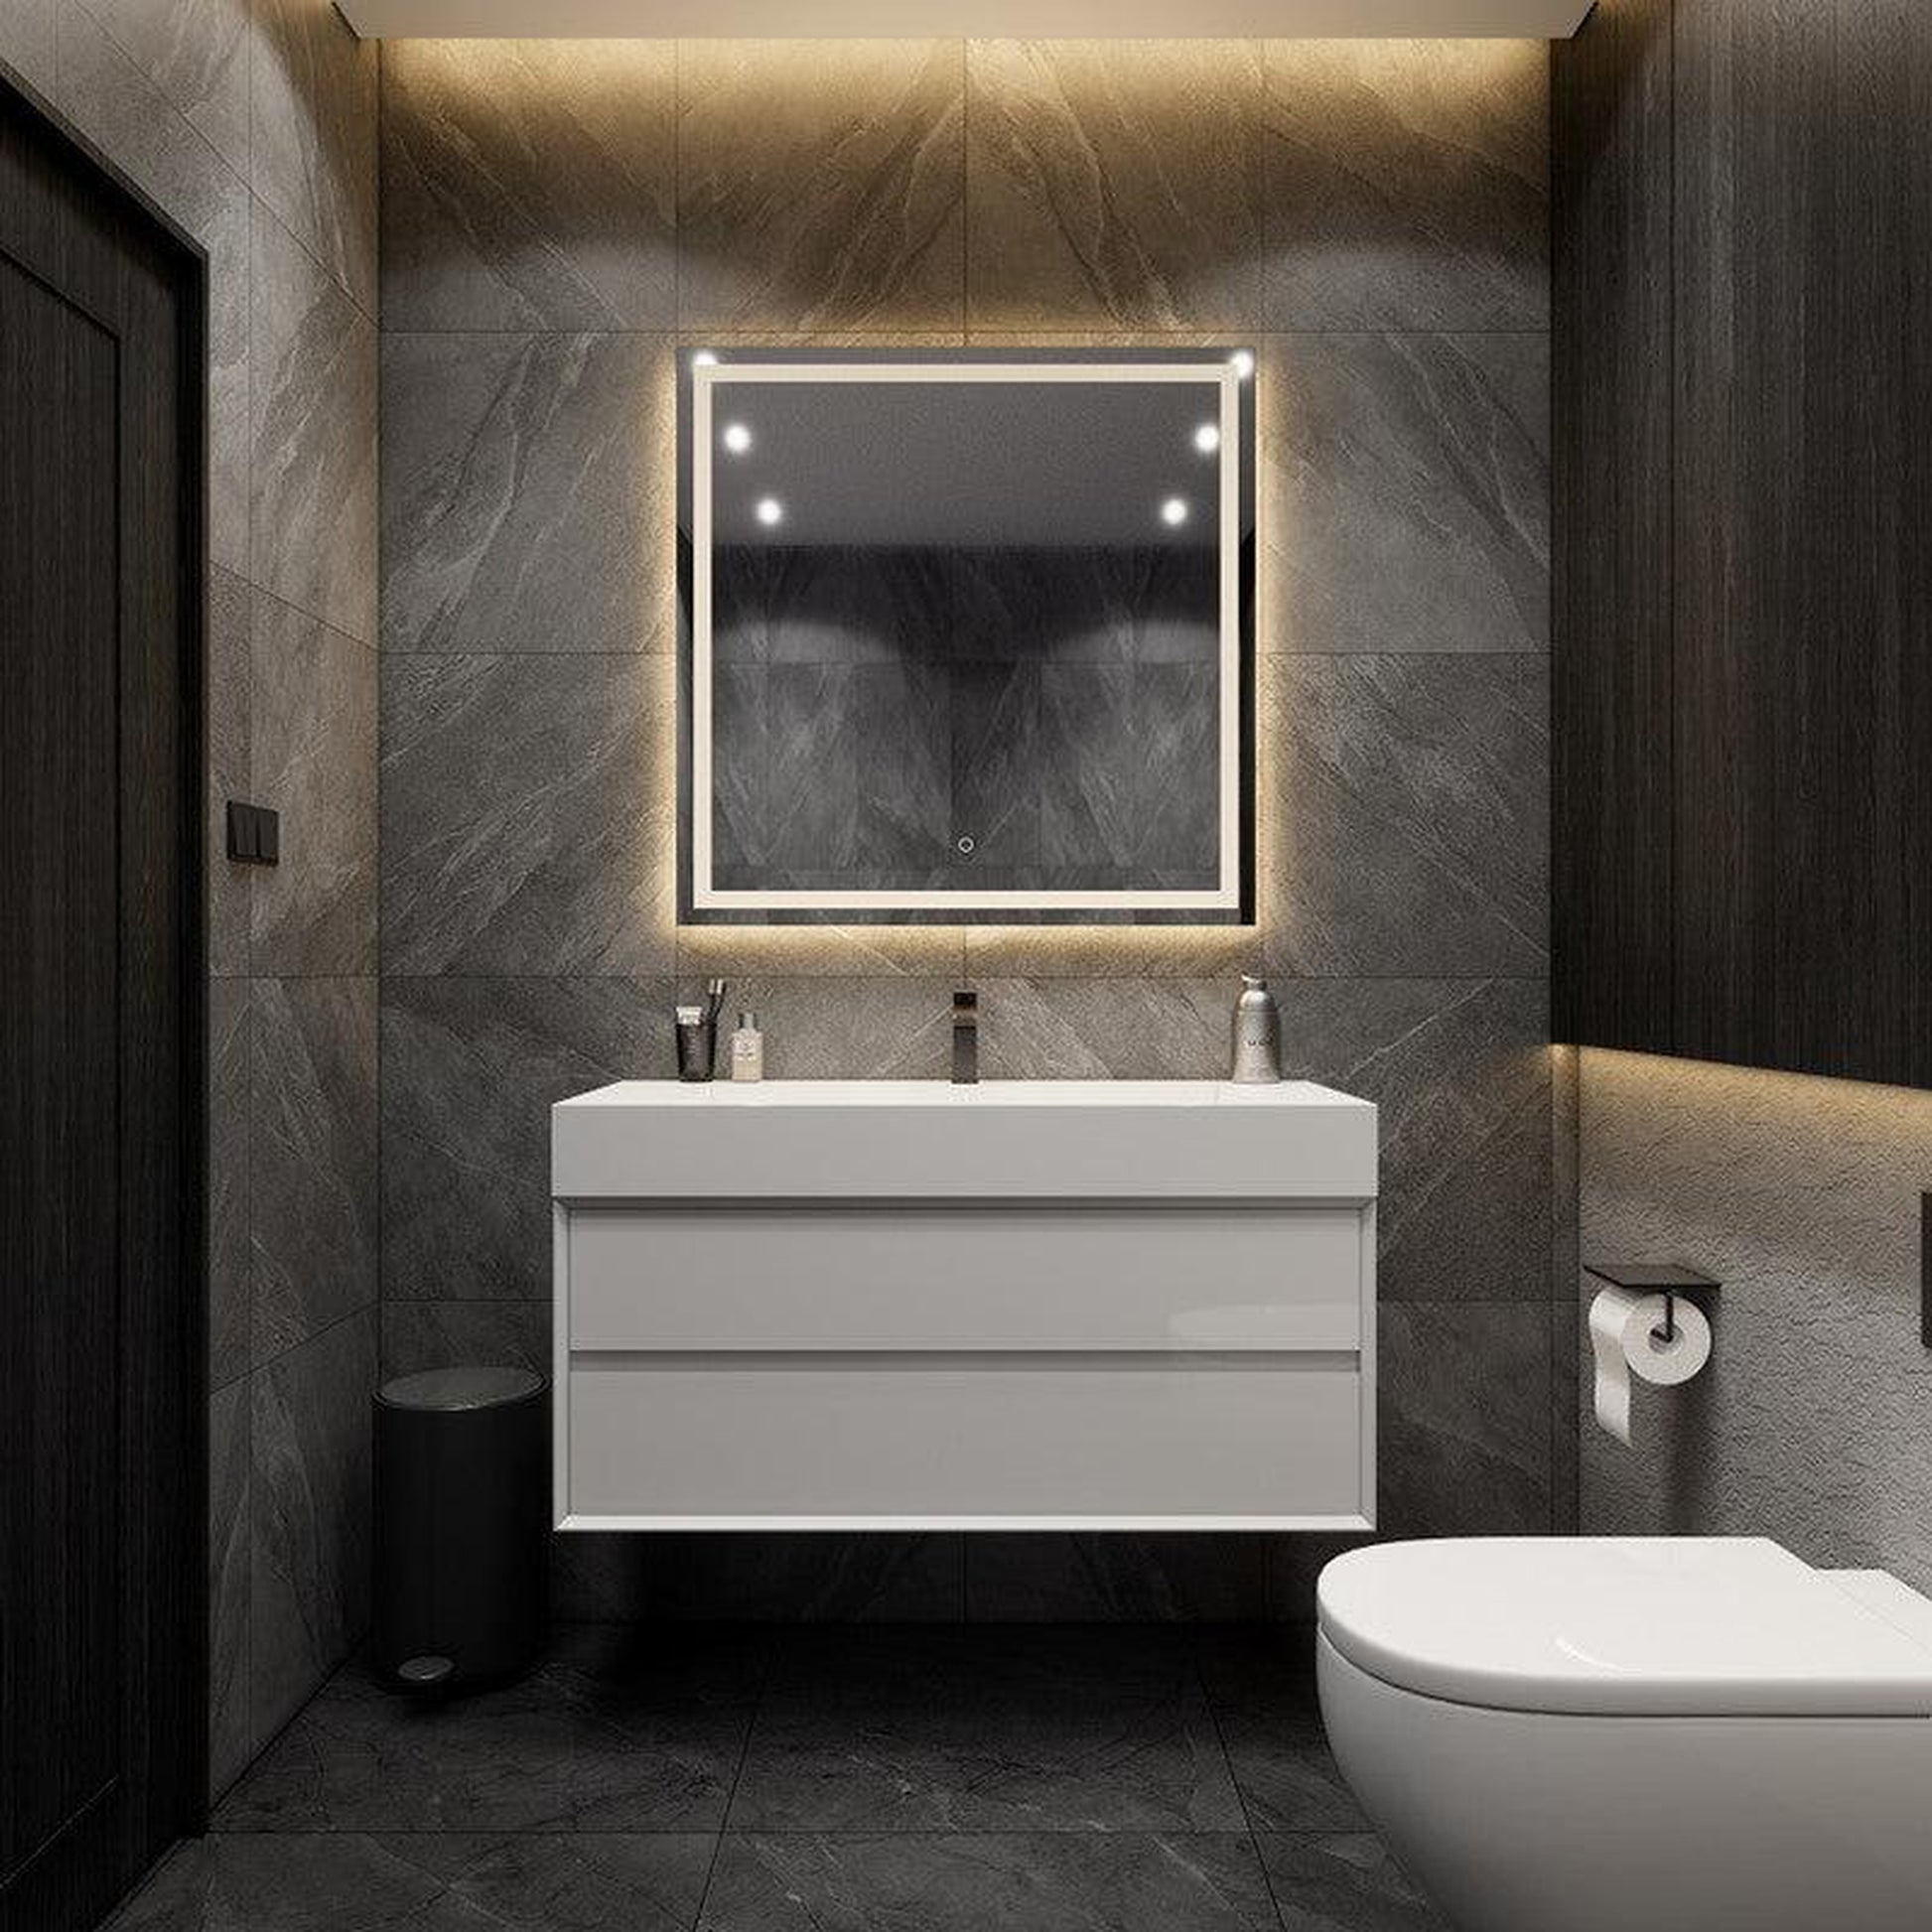 Moreno Bath MAX 48" Gloss White Wall-Mounted Vanity With Single Reinforced White Acrylic Sink